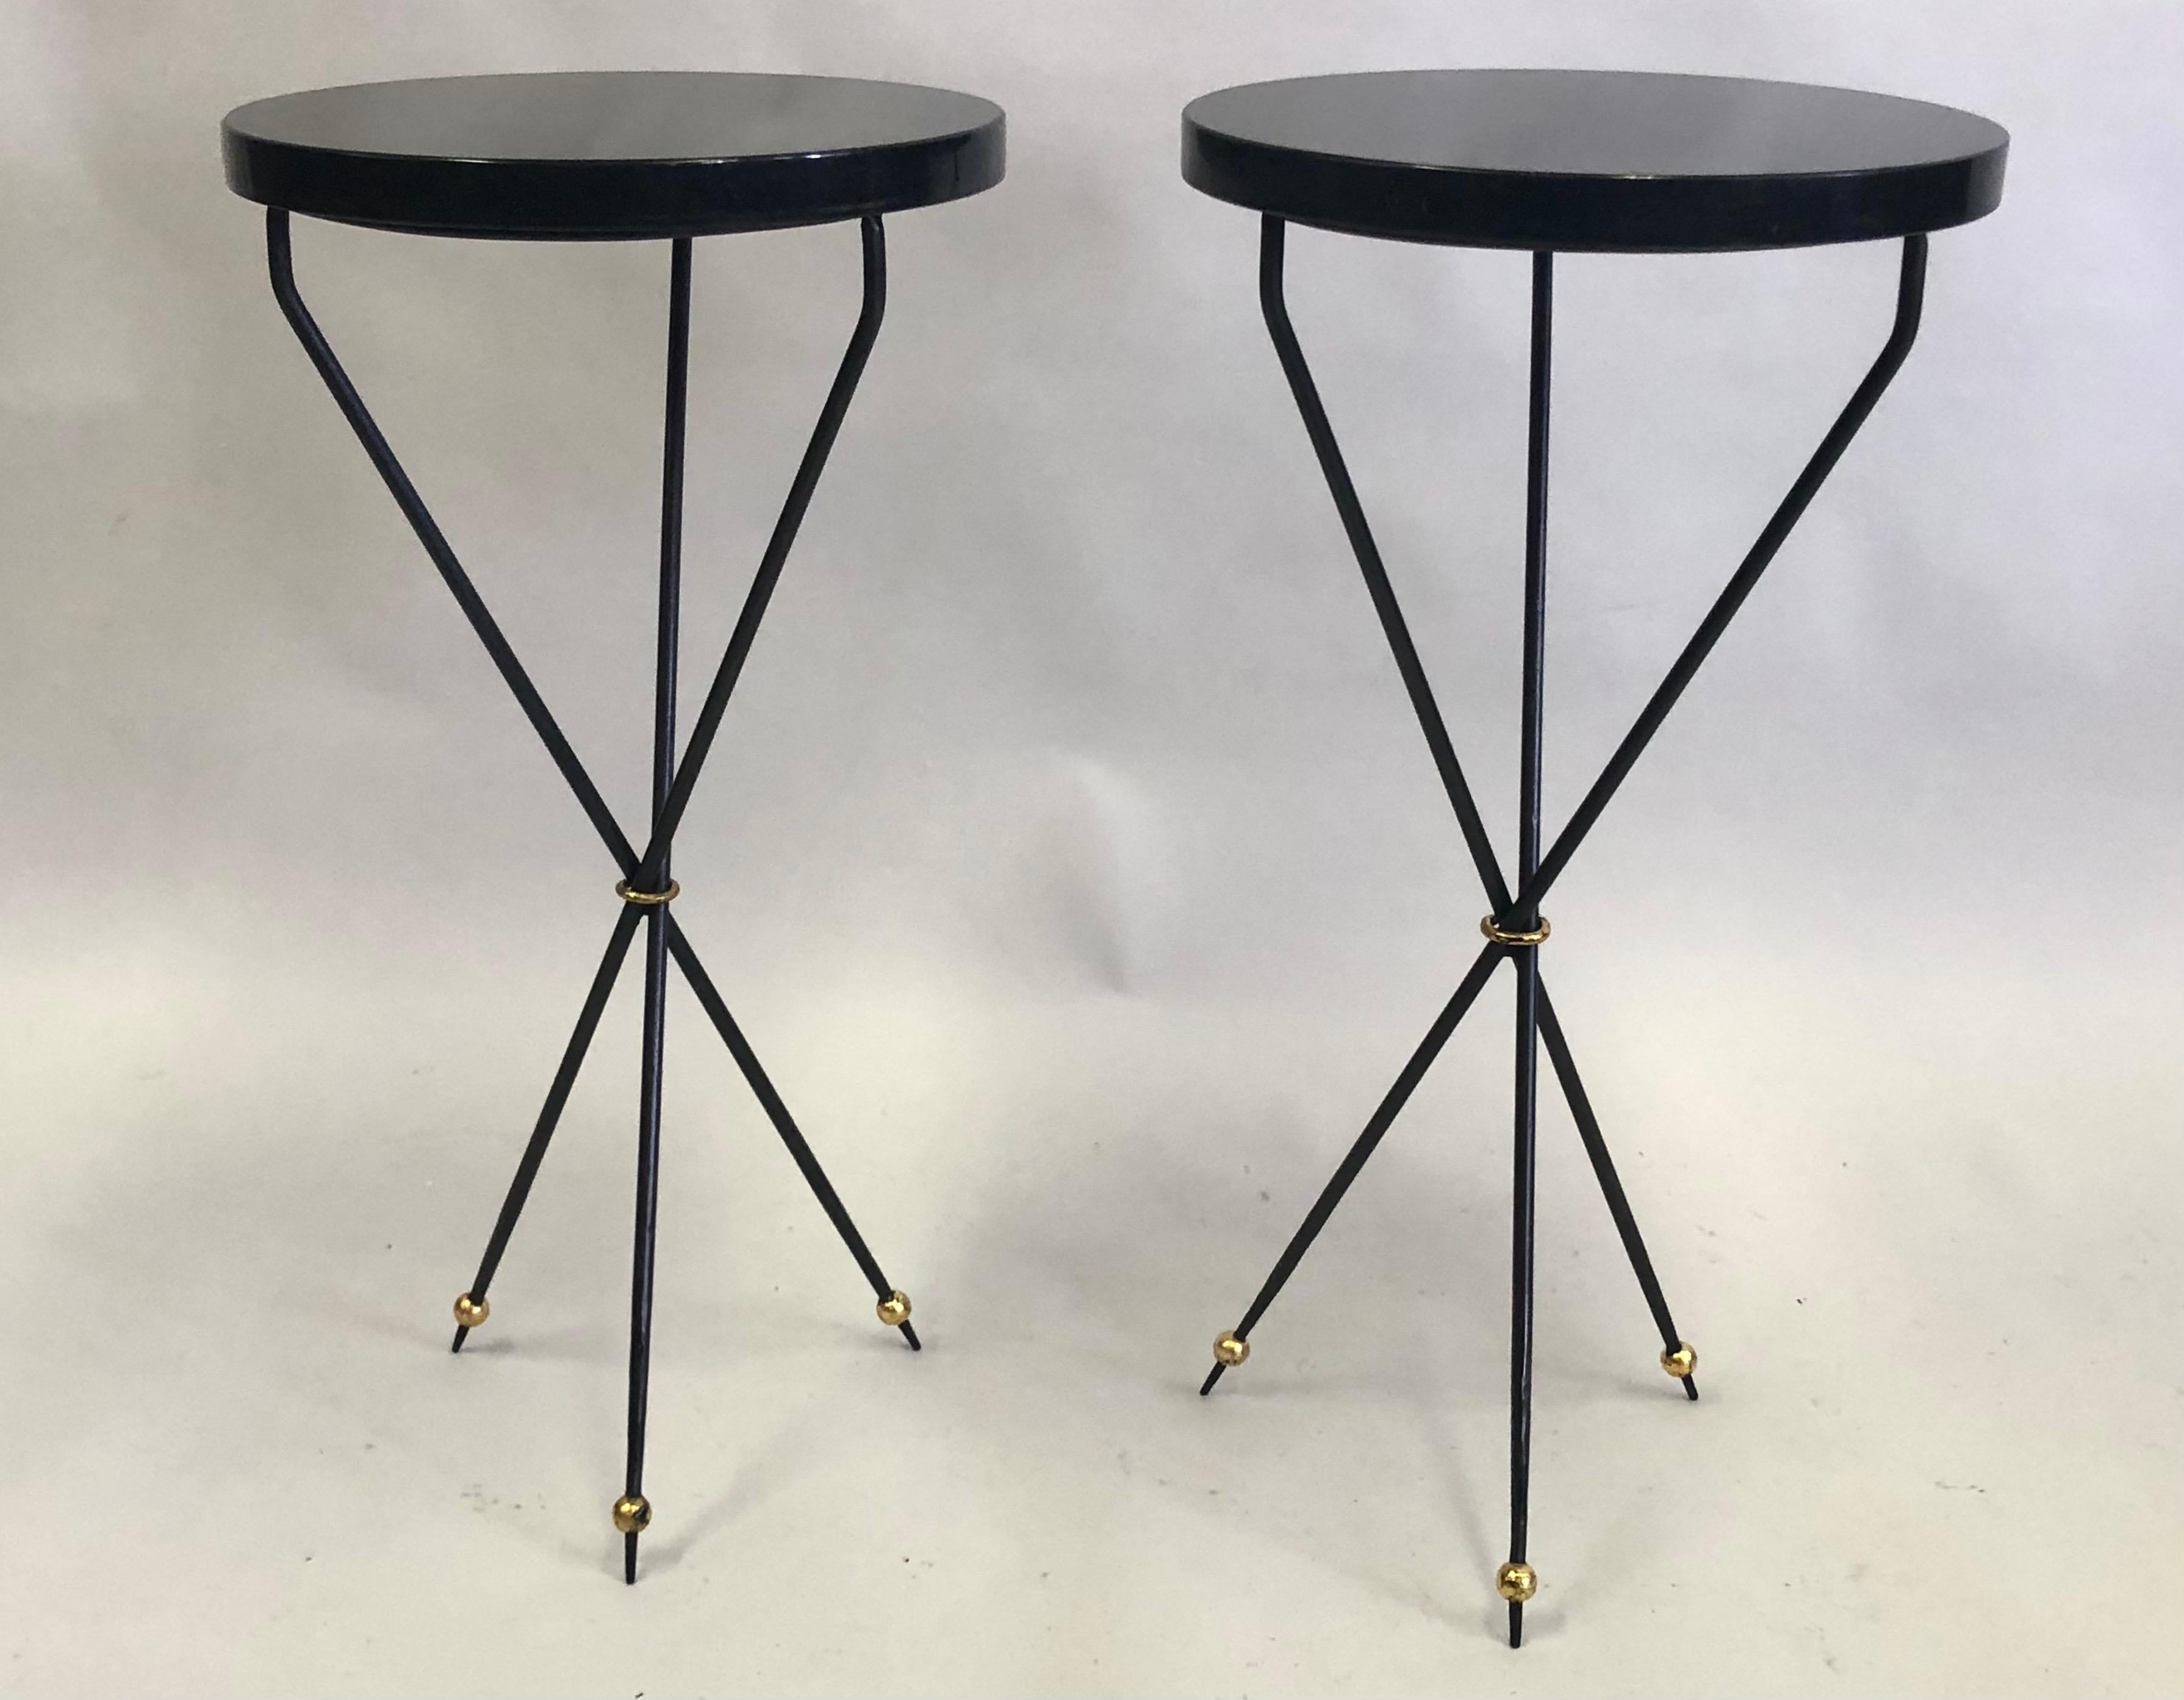 A delicate, refined pair of French Mid-Century Modern neoclassical side or end tables / gueridons in the spirit of Jean Michel Frank. The pieces are composed of a pure, sober, minimal, yet dramatic tripod form. The legs are long, thin and angled